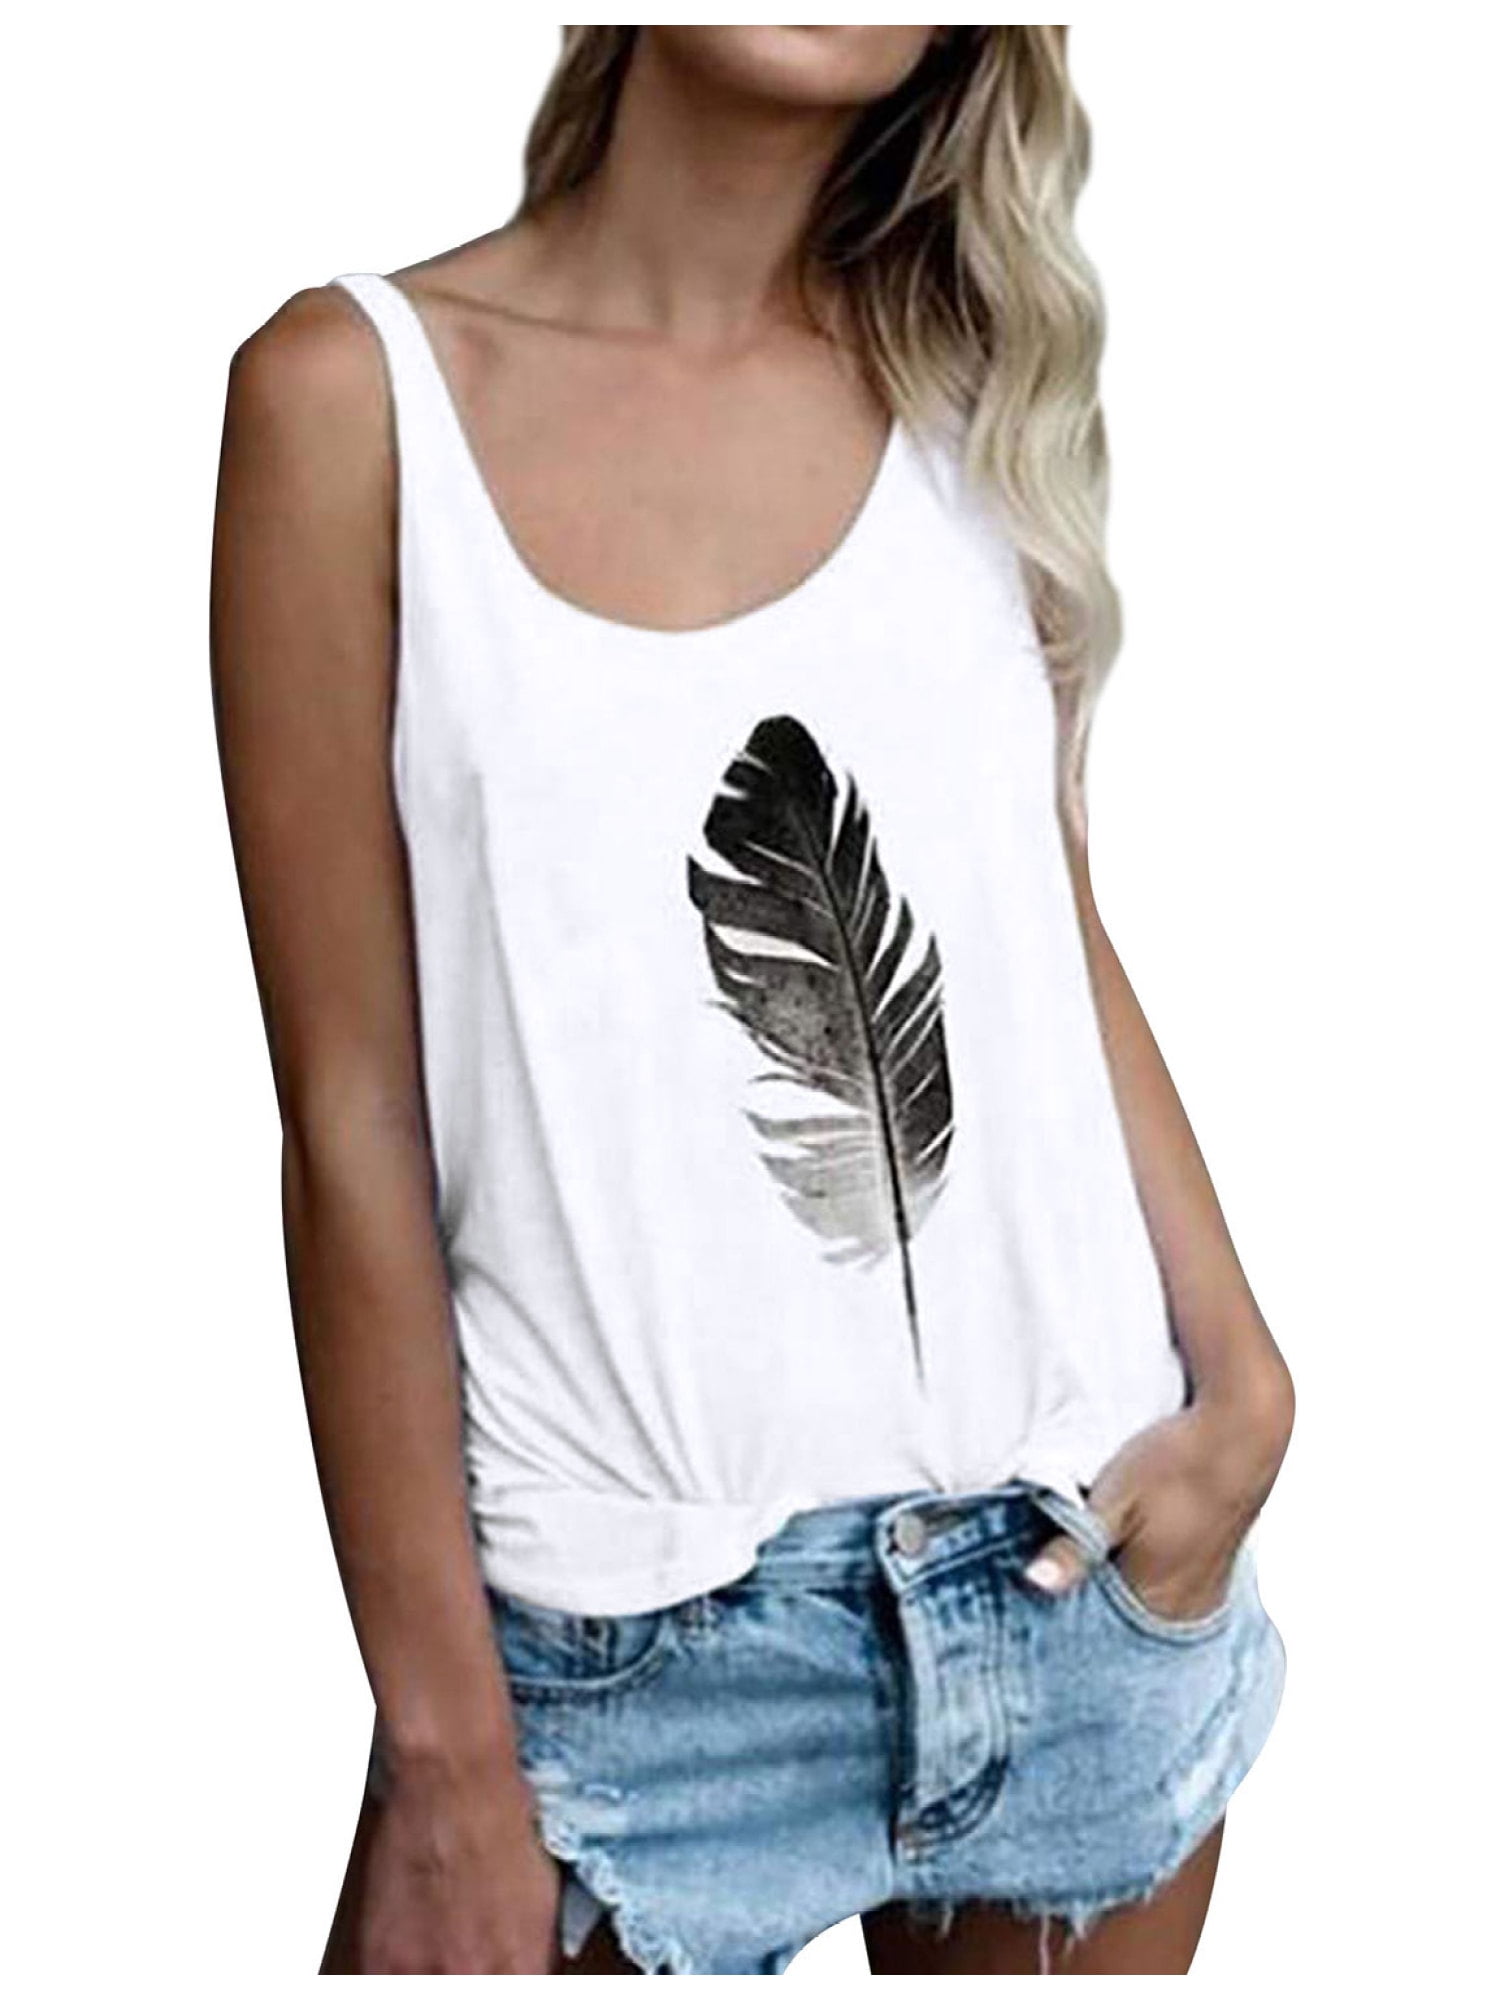 cute tank tops for summer